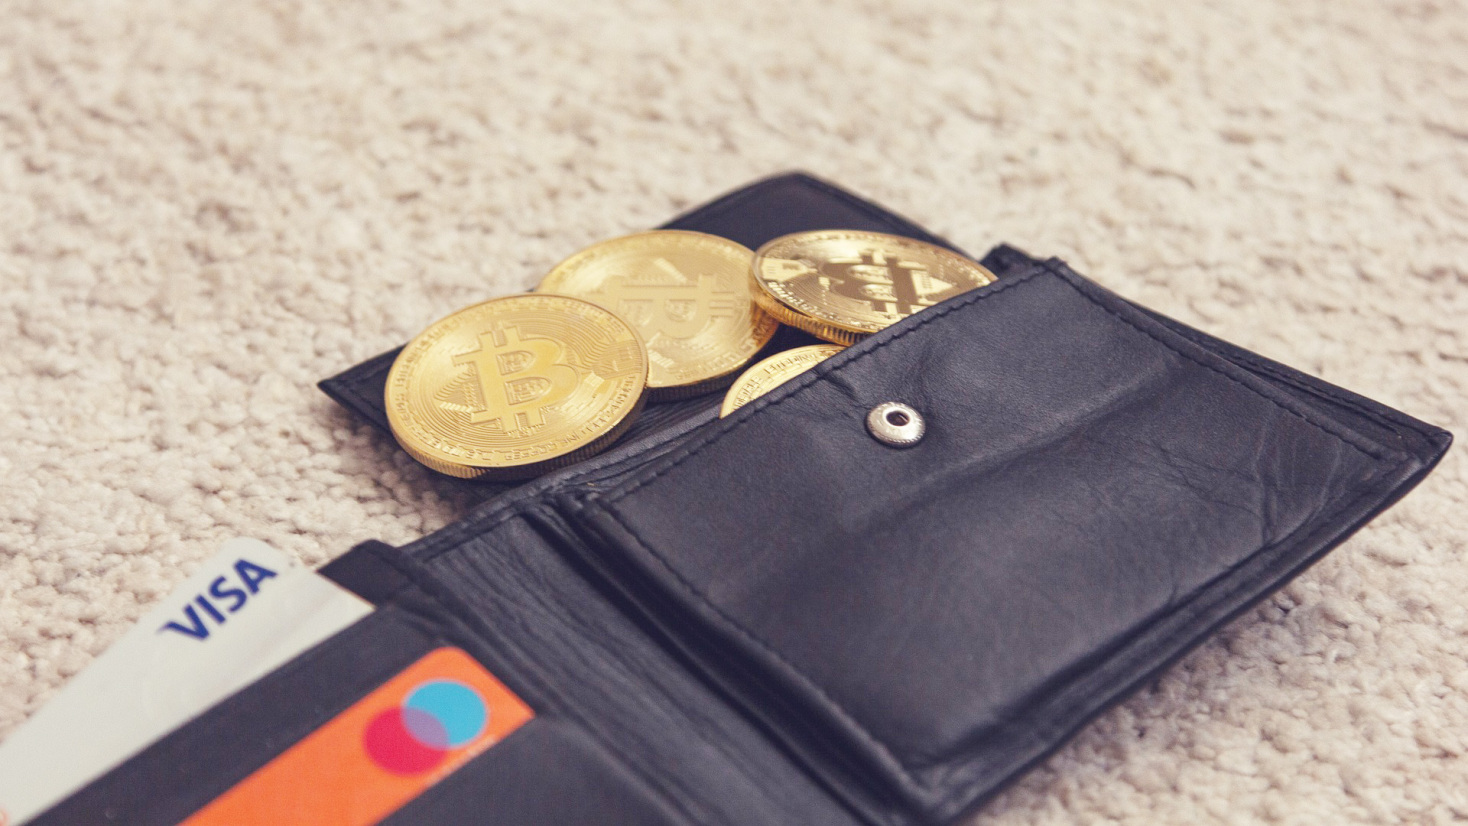 5 Best Bitcoin Wallets For Every Type of User